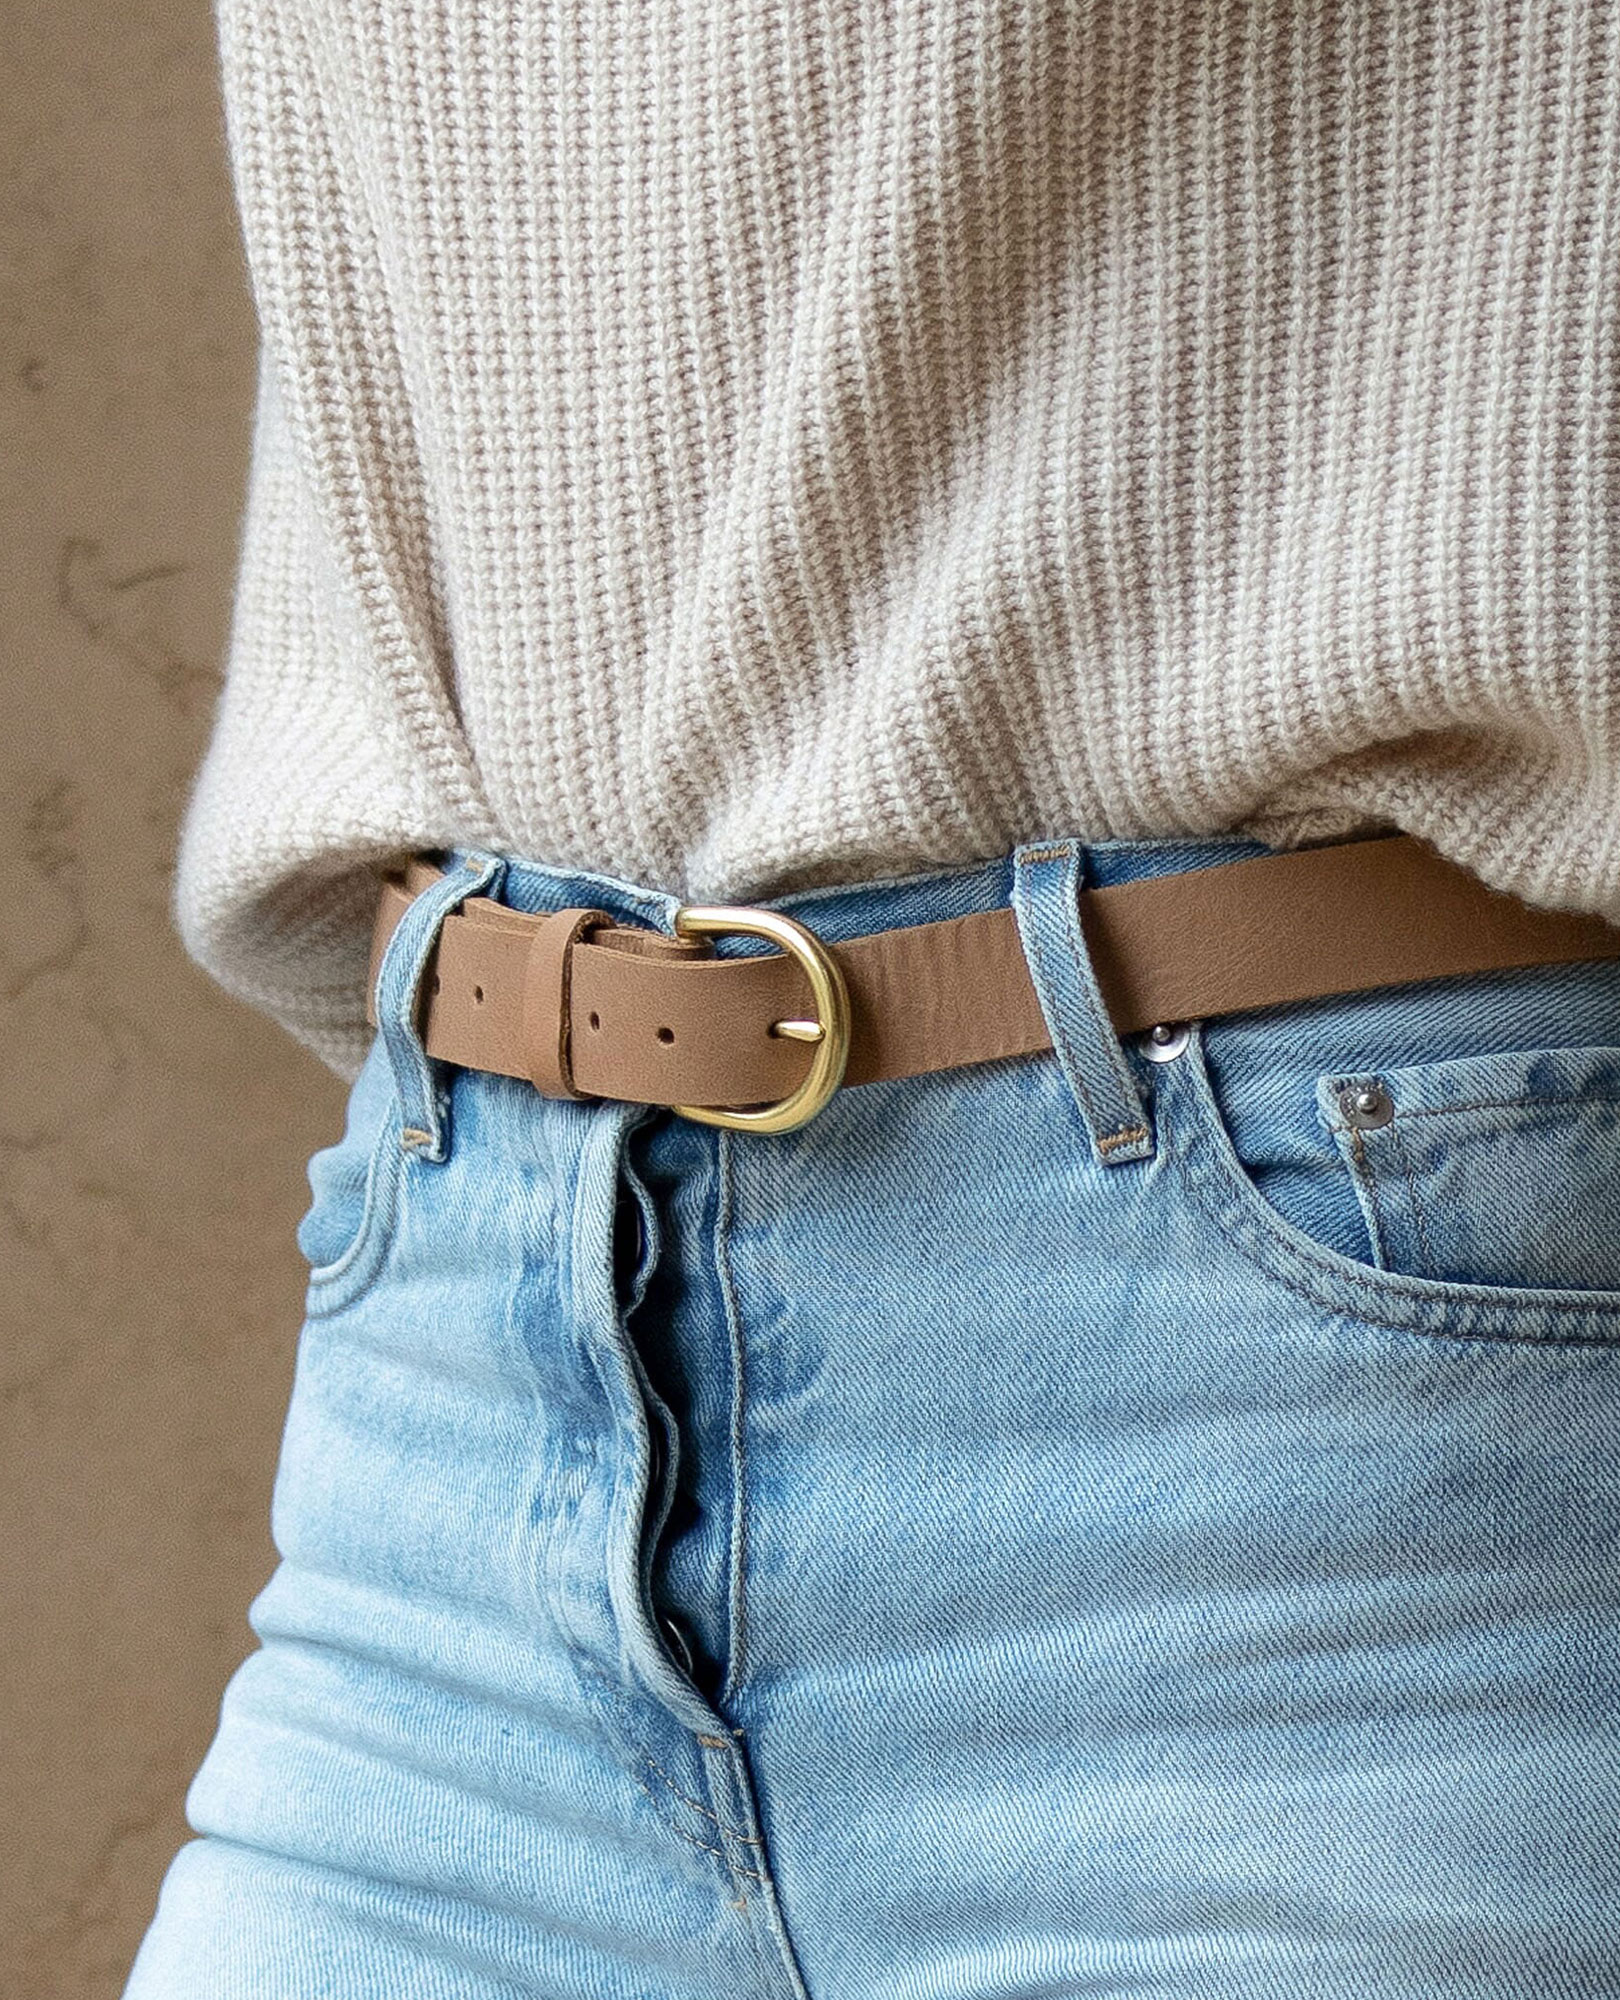 sparkpick features nisolo leather belt in sustainable fashion